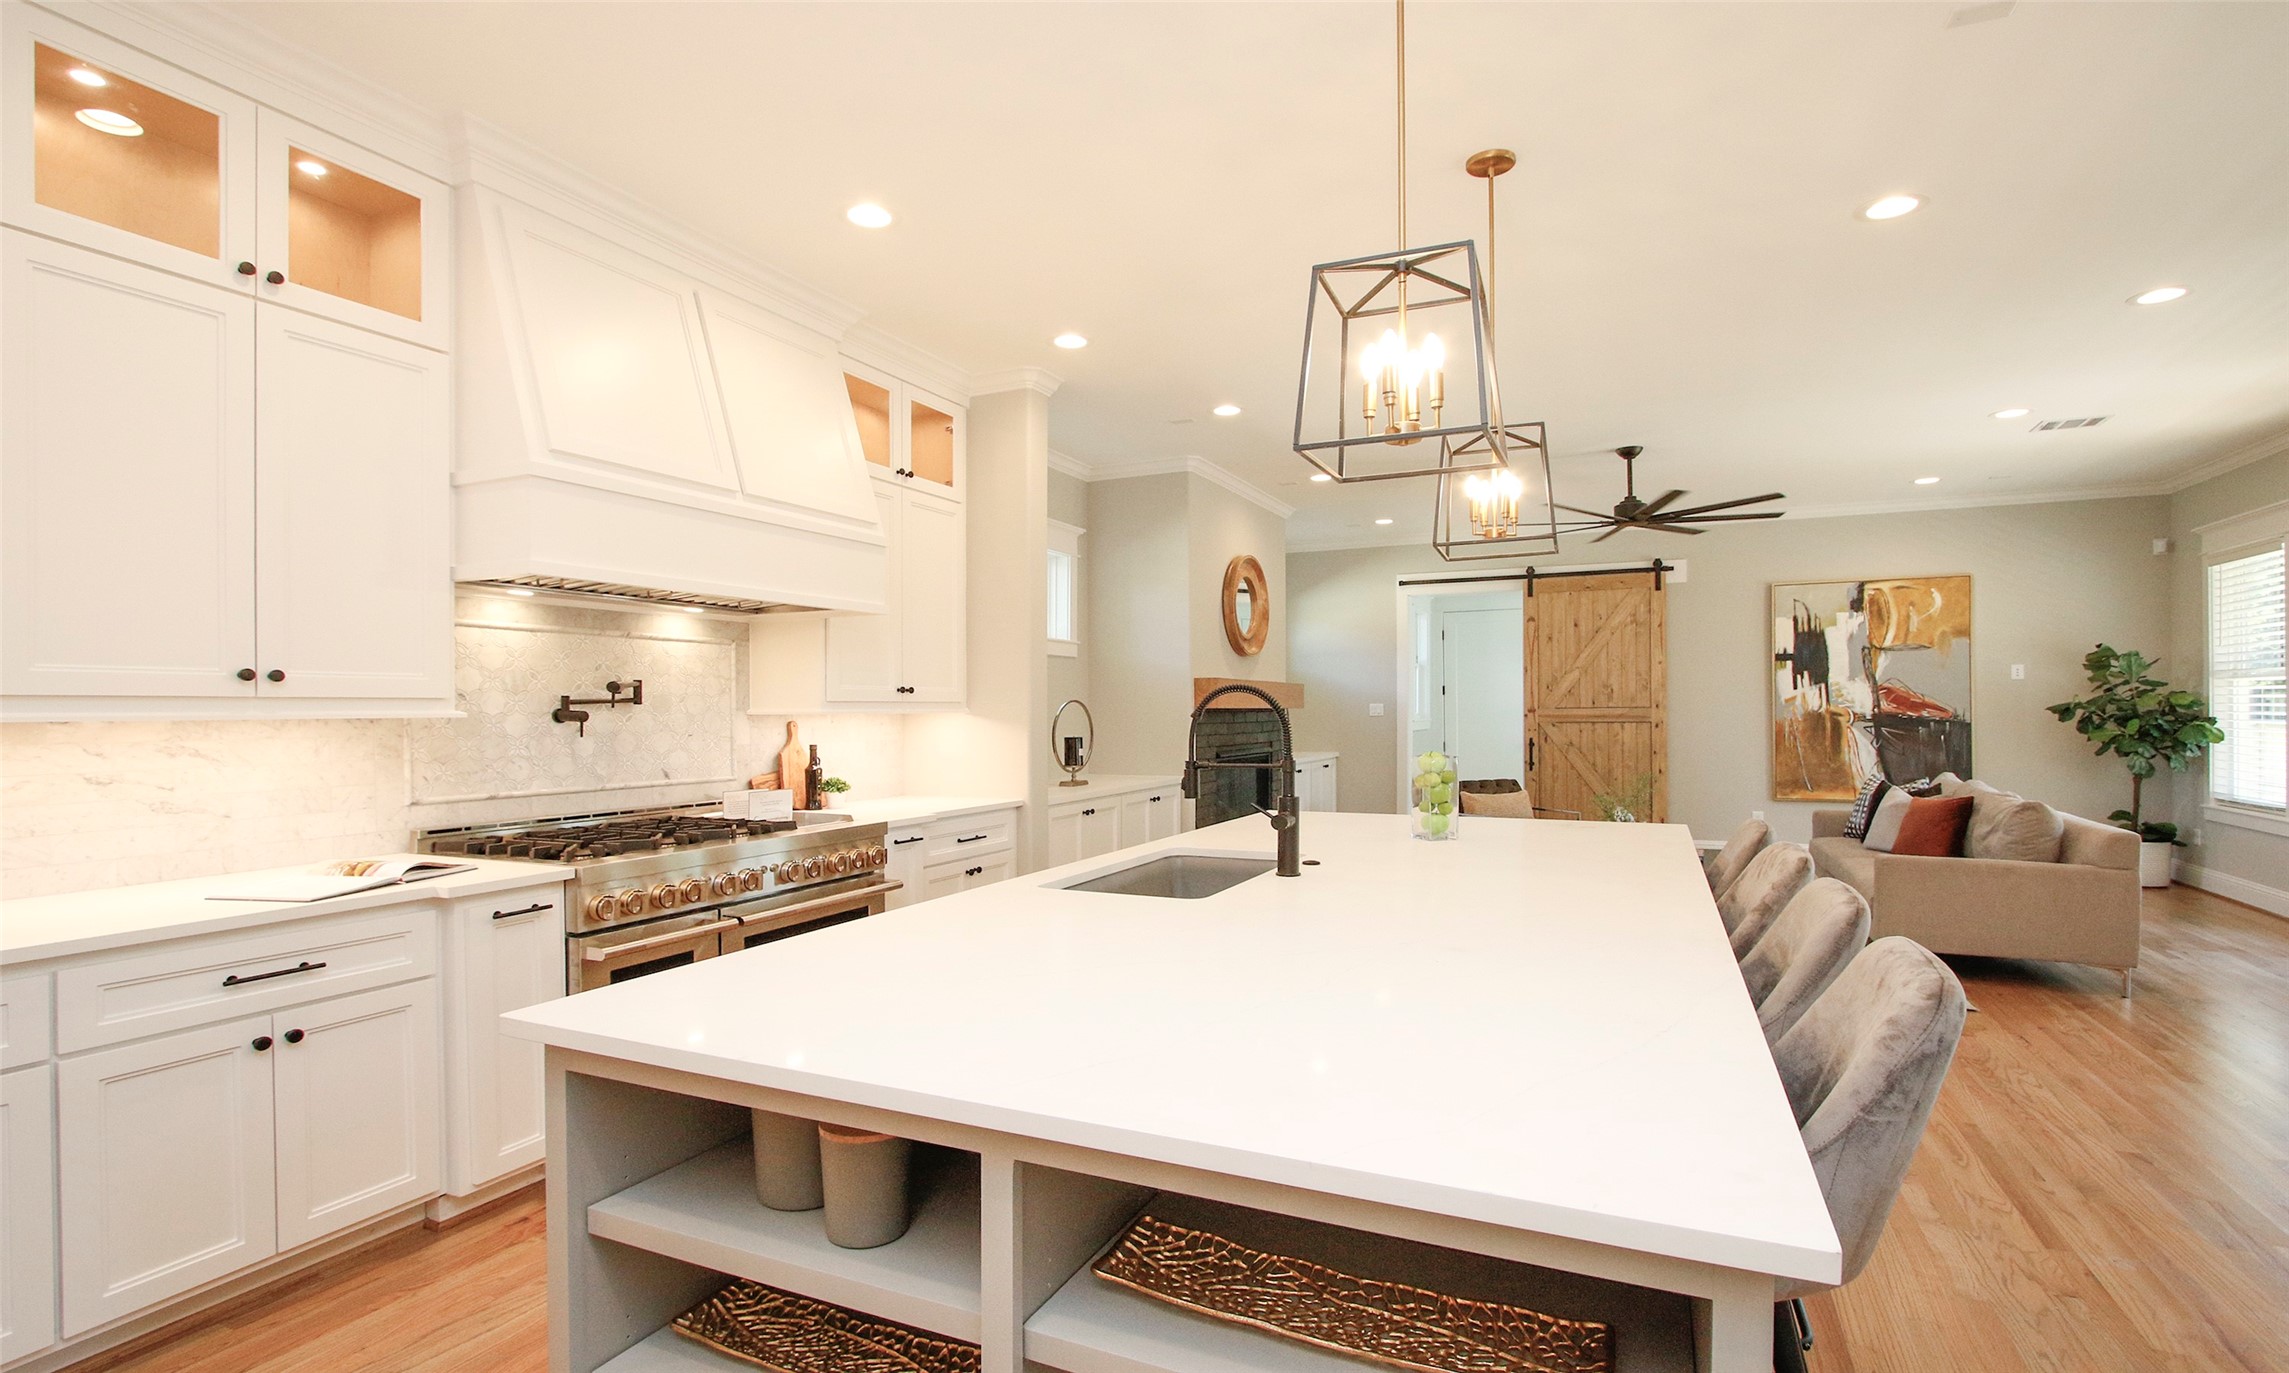 Beautiful Kitchen---opens into Living Room